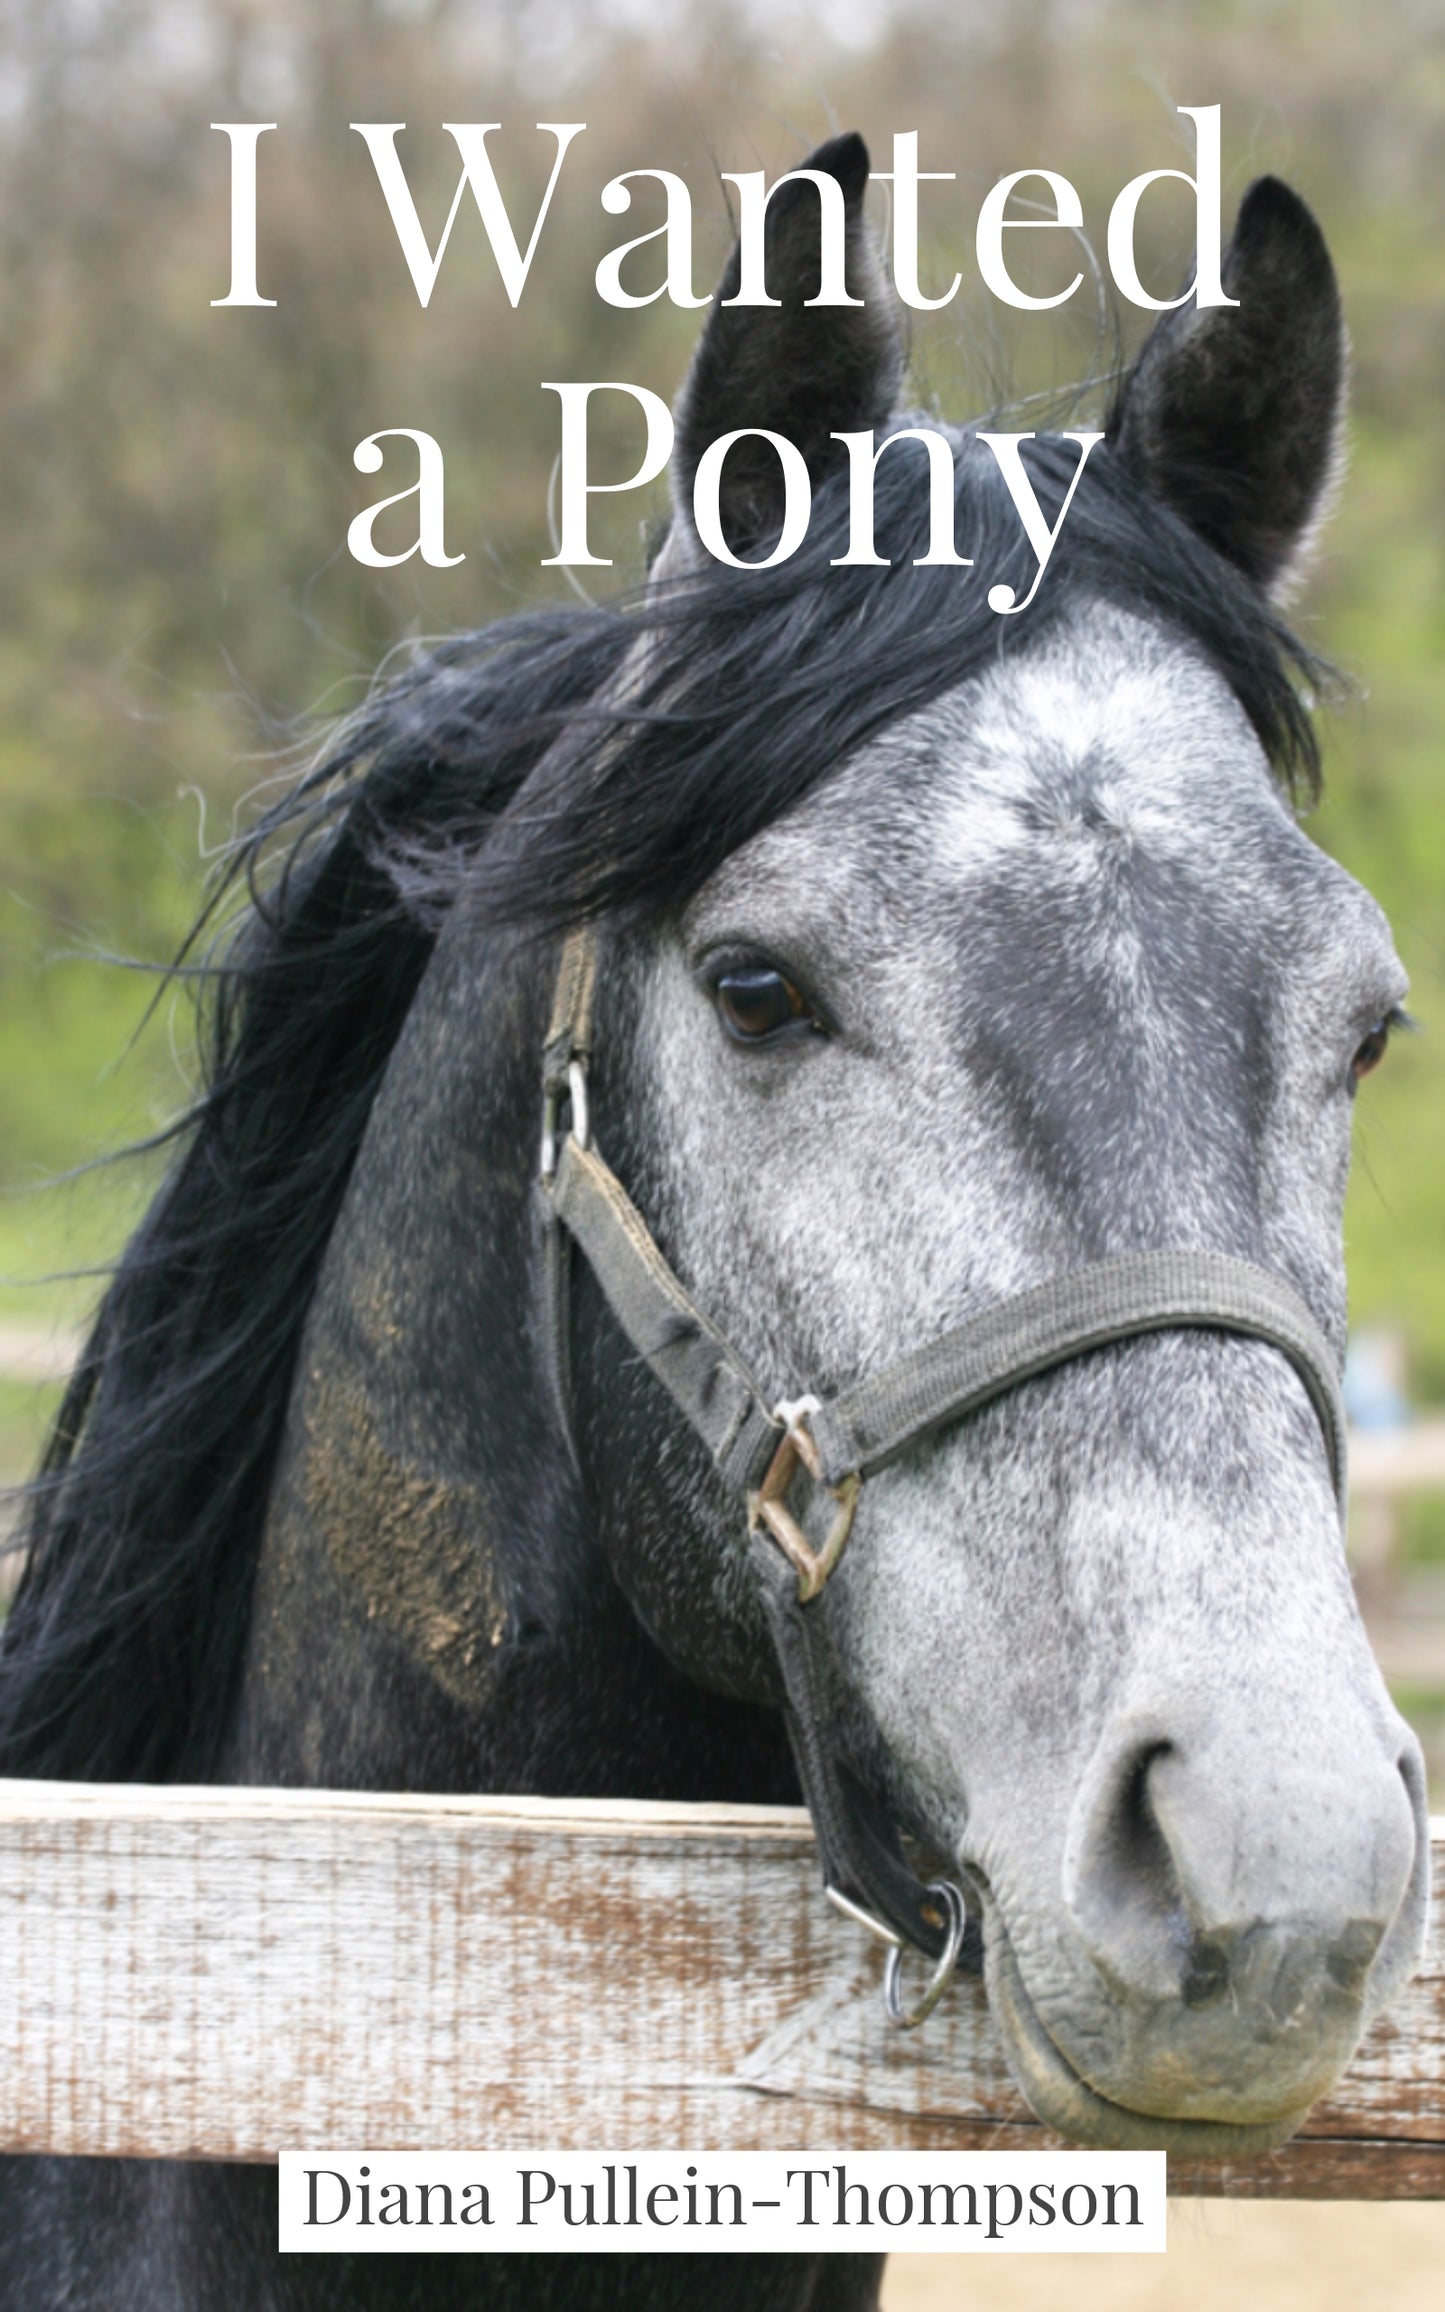 Diana Pullein-Thompson: I Wanted a Pony (eBook)